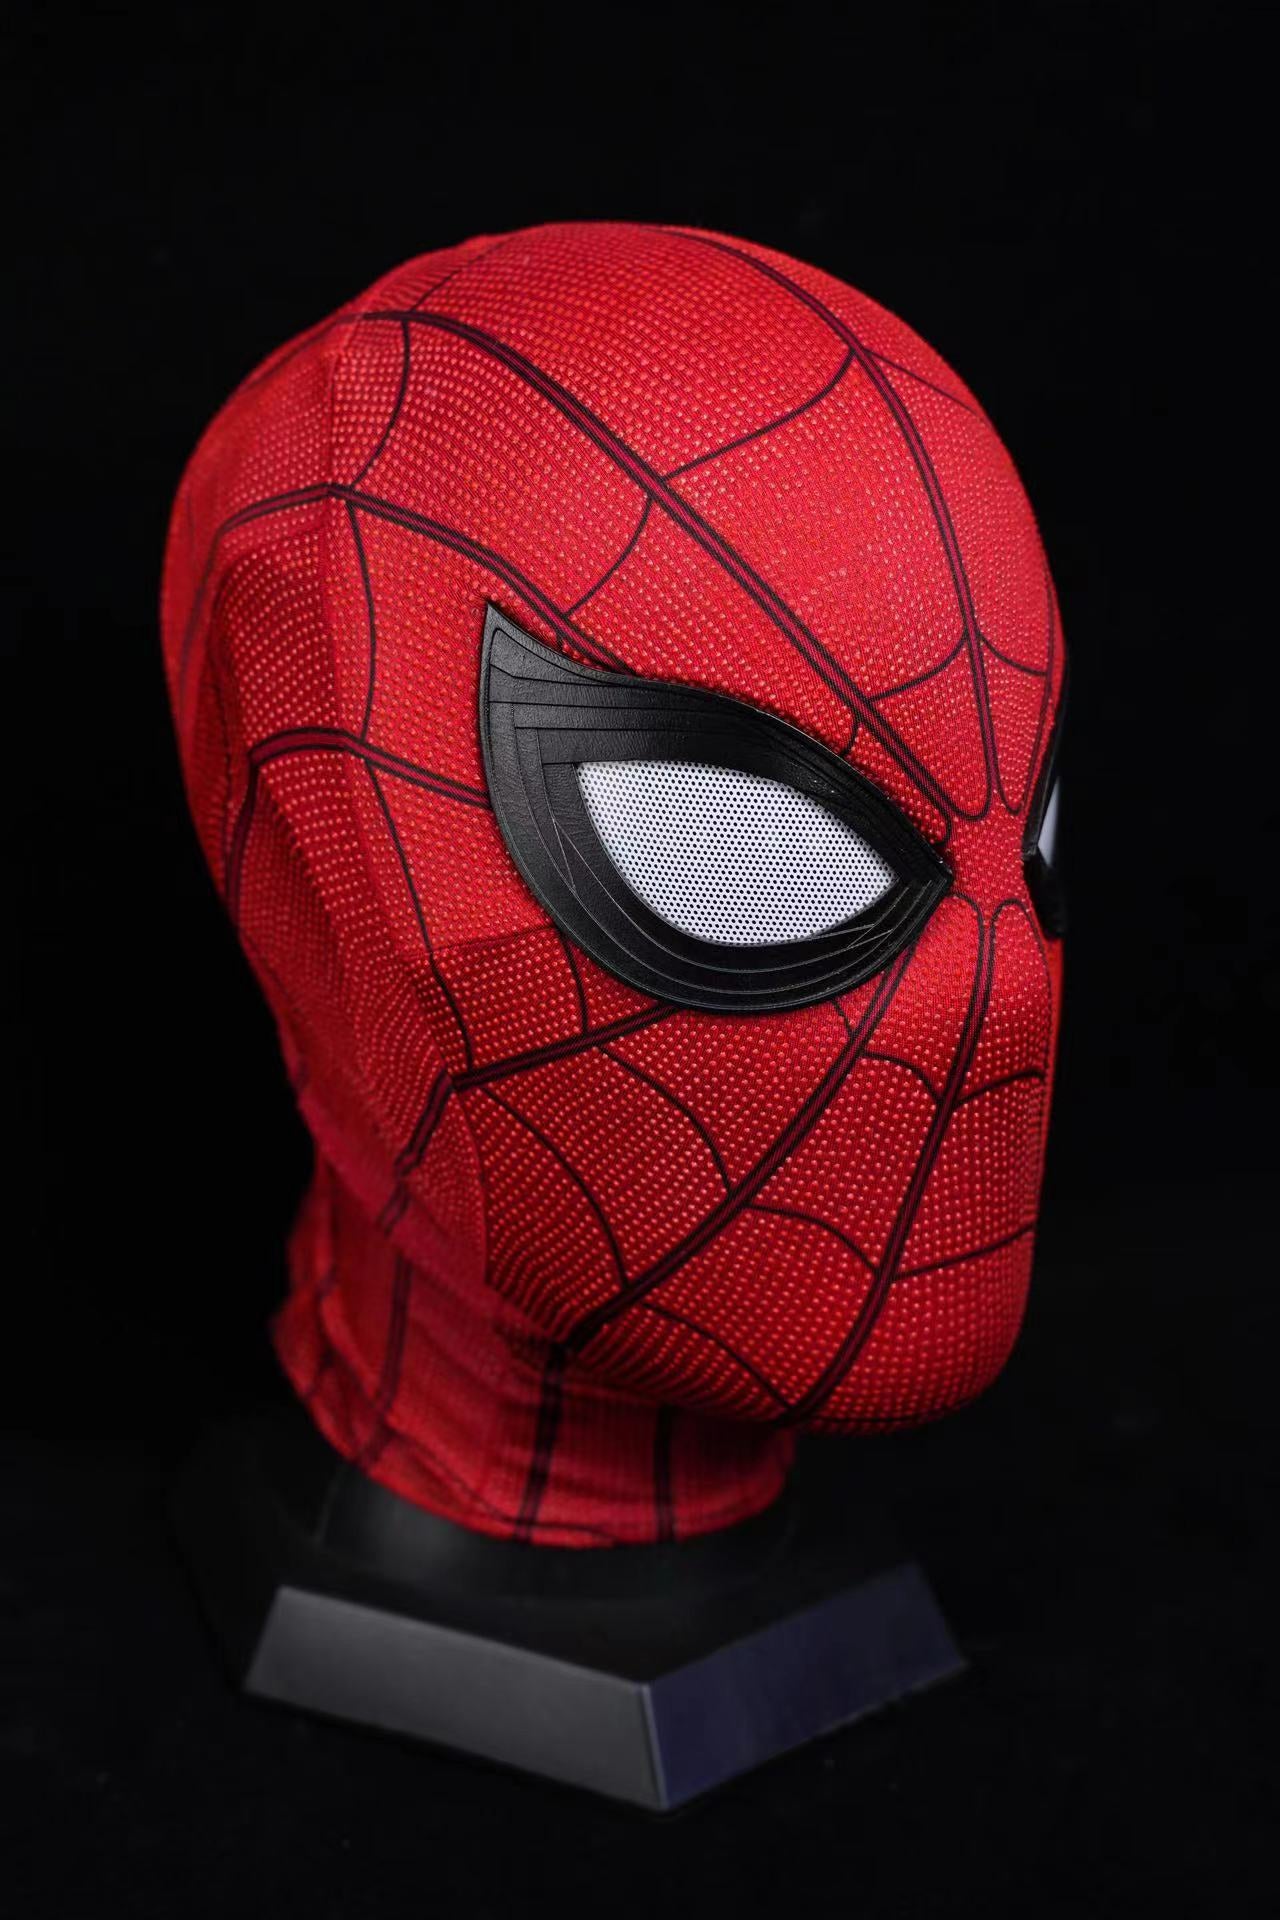 Upgraded Version Homecoming Spidey Mask  (Tom Holland version)